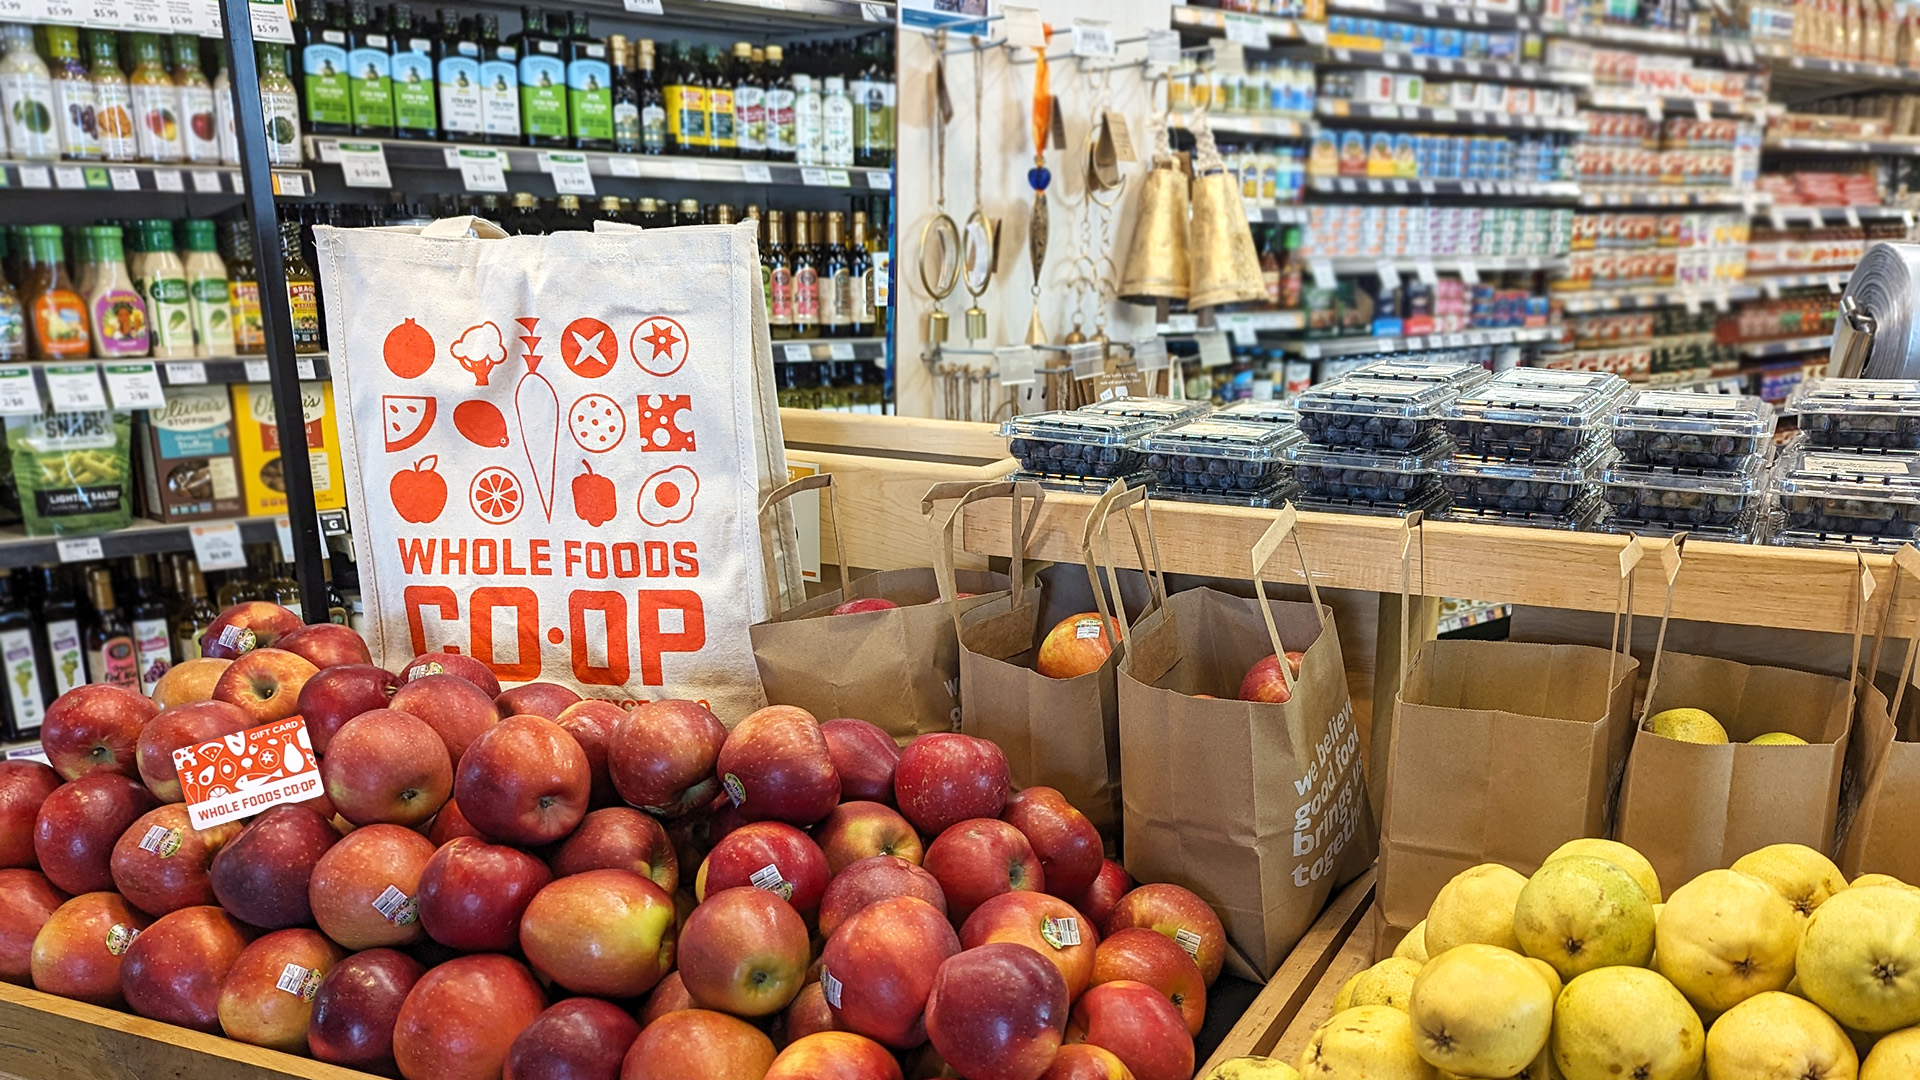 A display in a grocery store features apples and yellow apples in paper bags, and containers of blueberries. A reusable Whole Foods Coop Duluth MN shopping bag is visible among the apples, and shelves stocked with various food items are in the background.